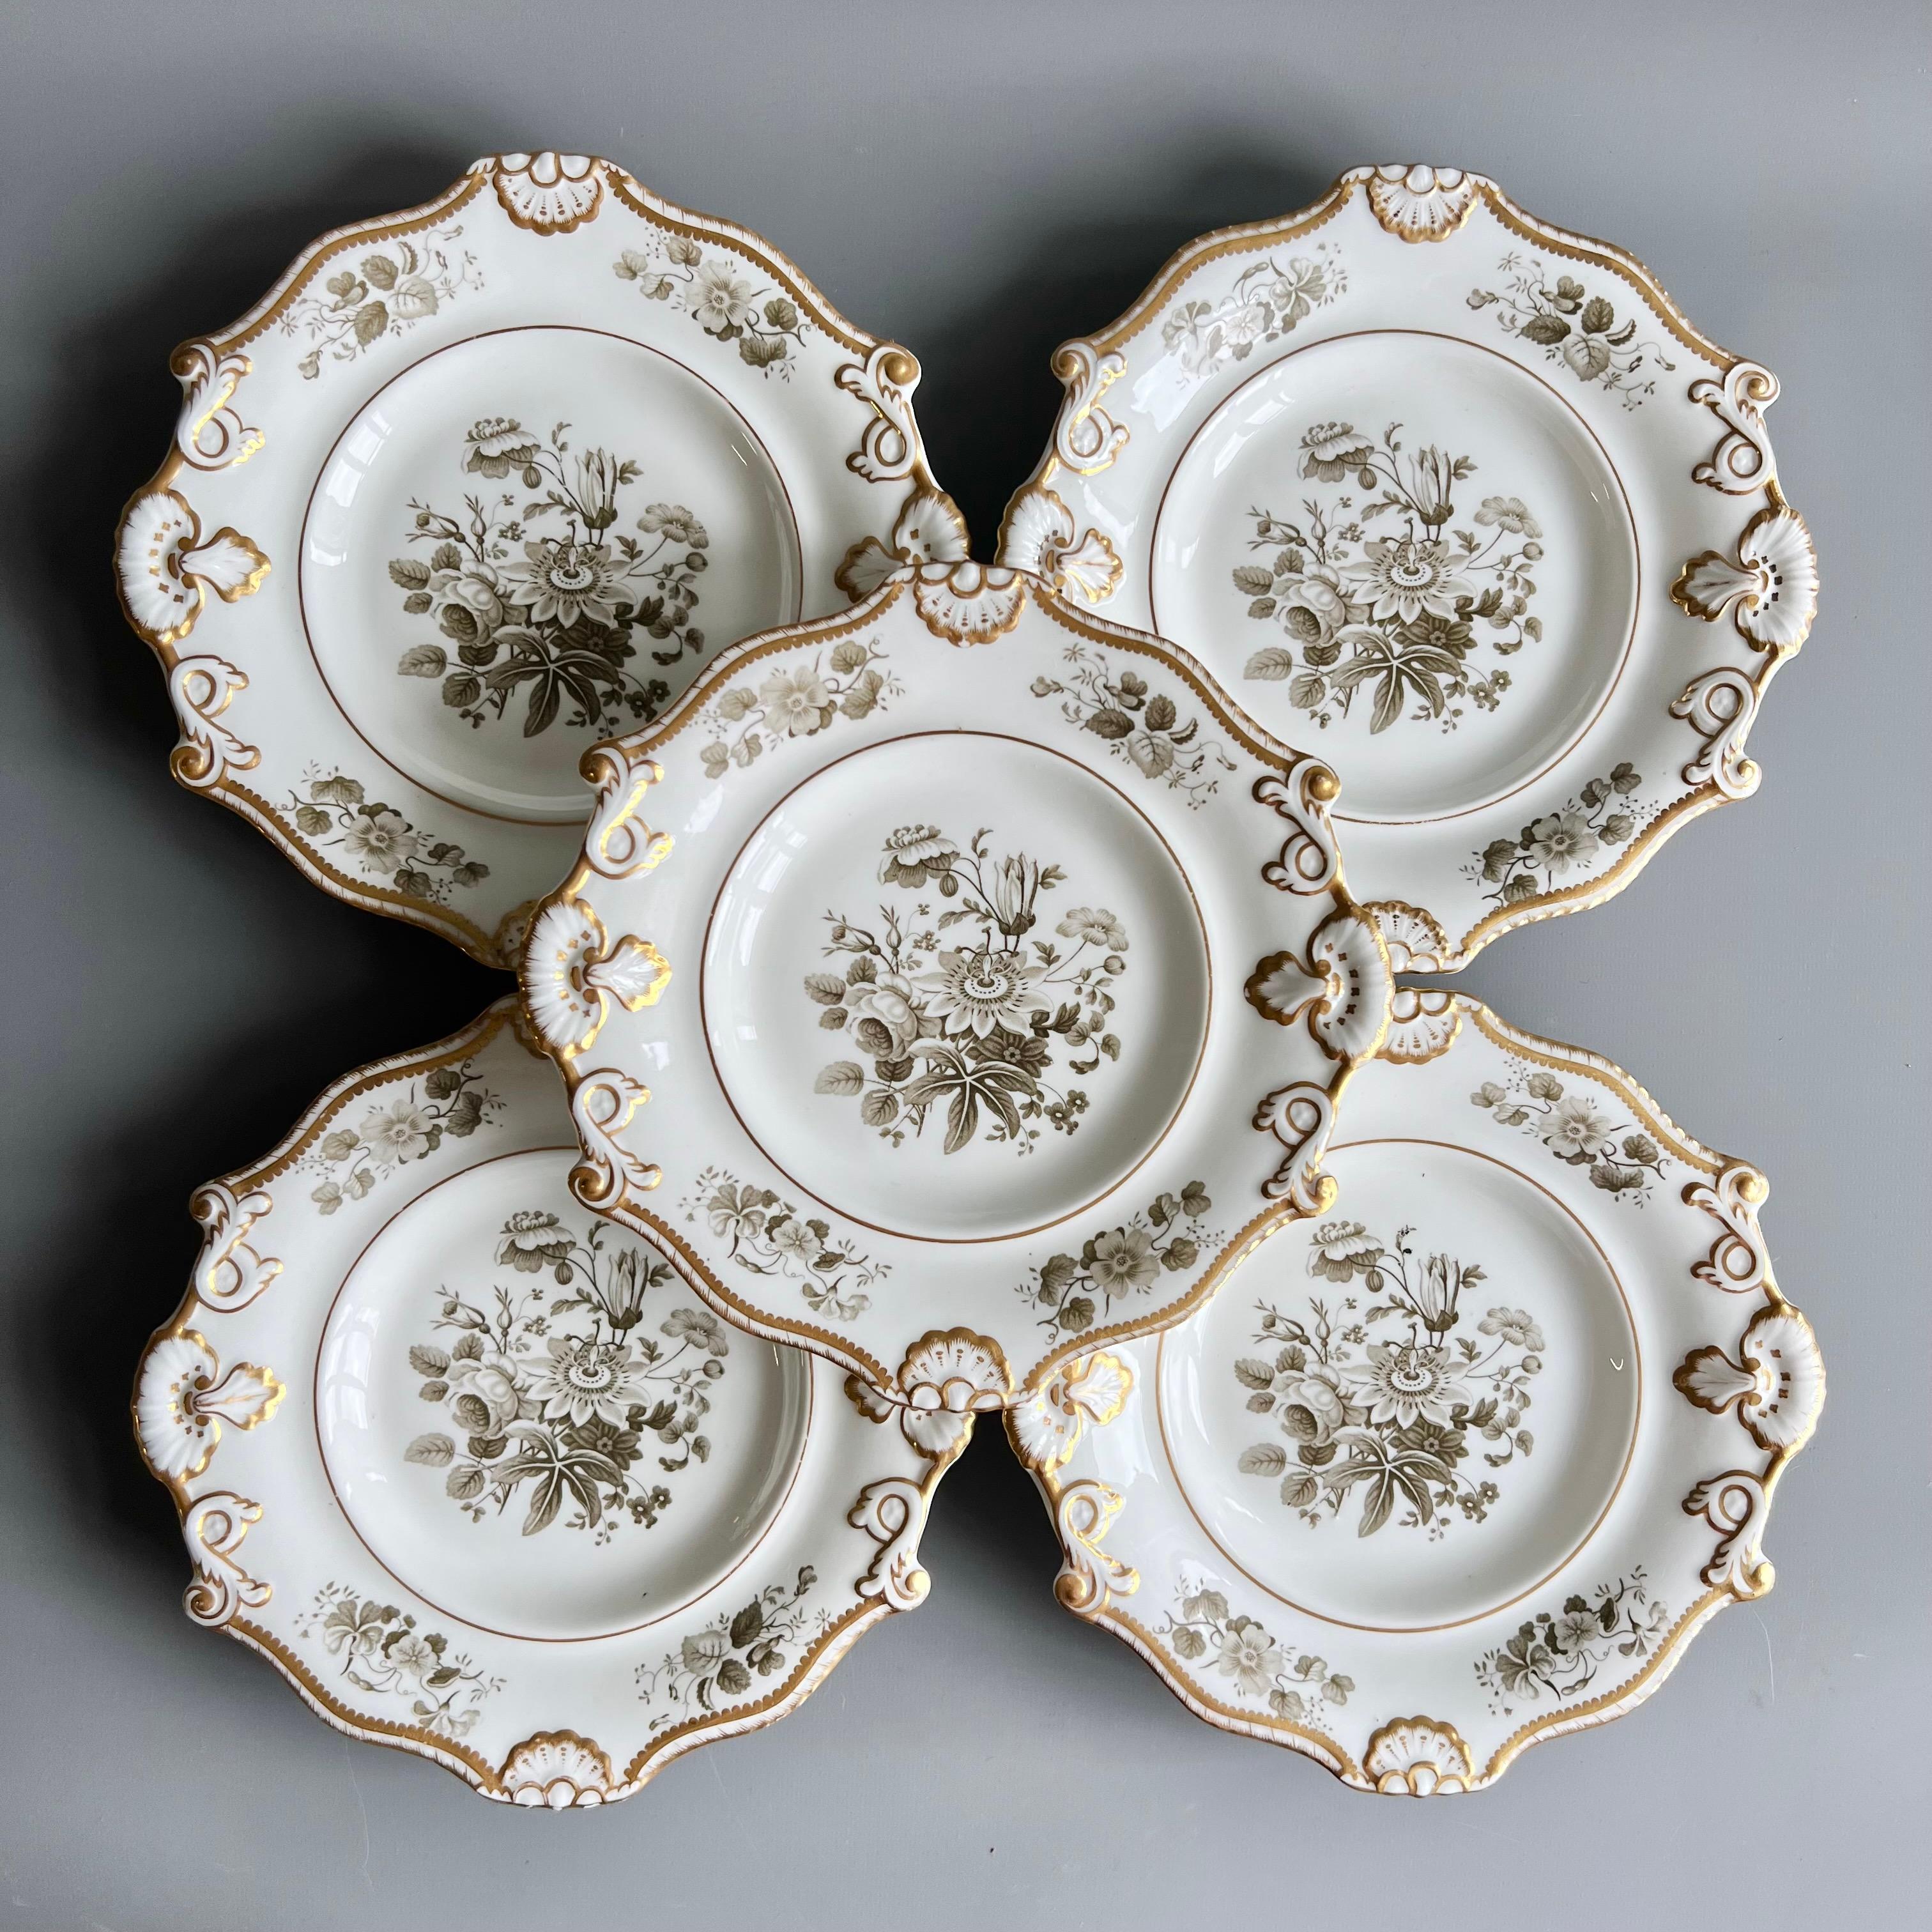 Mid-19th Century Minton Dessert Service, Inverted Shell White with Monochrome Flowers, ca 1830 For Sale